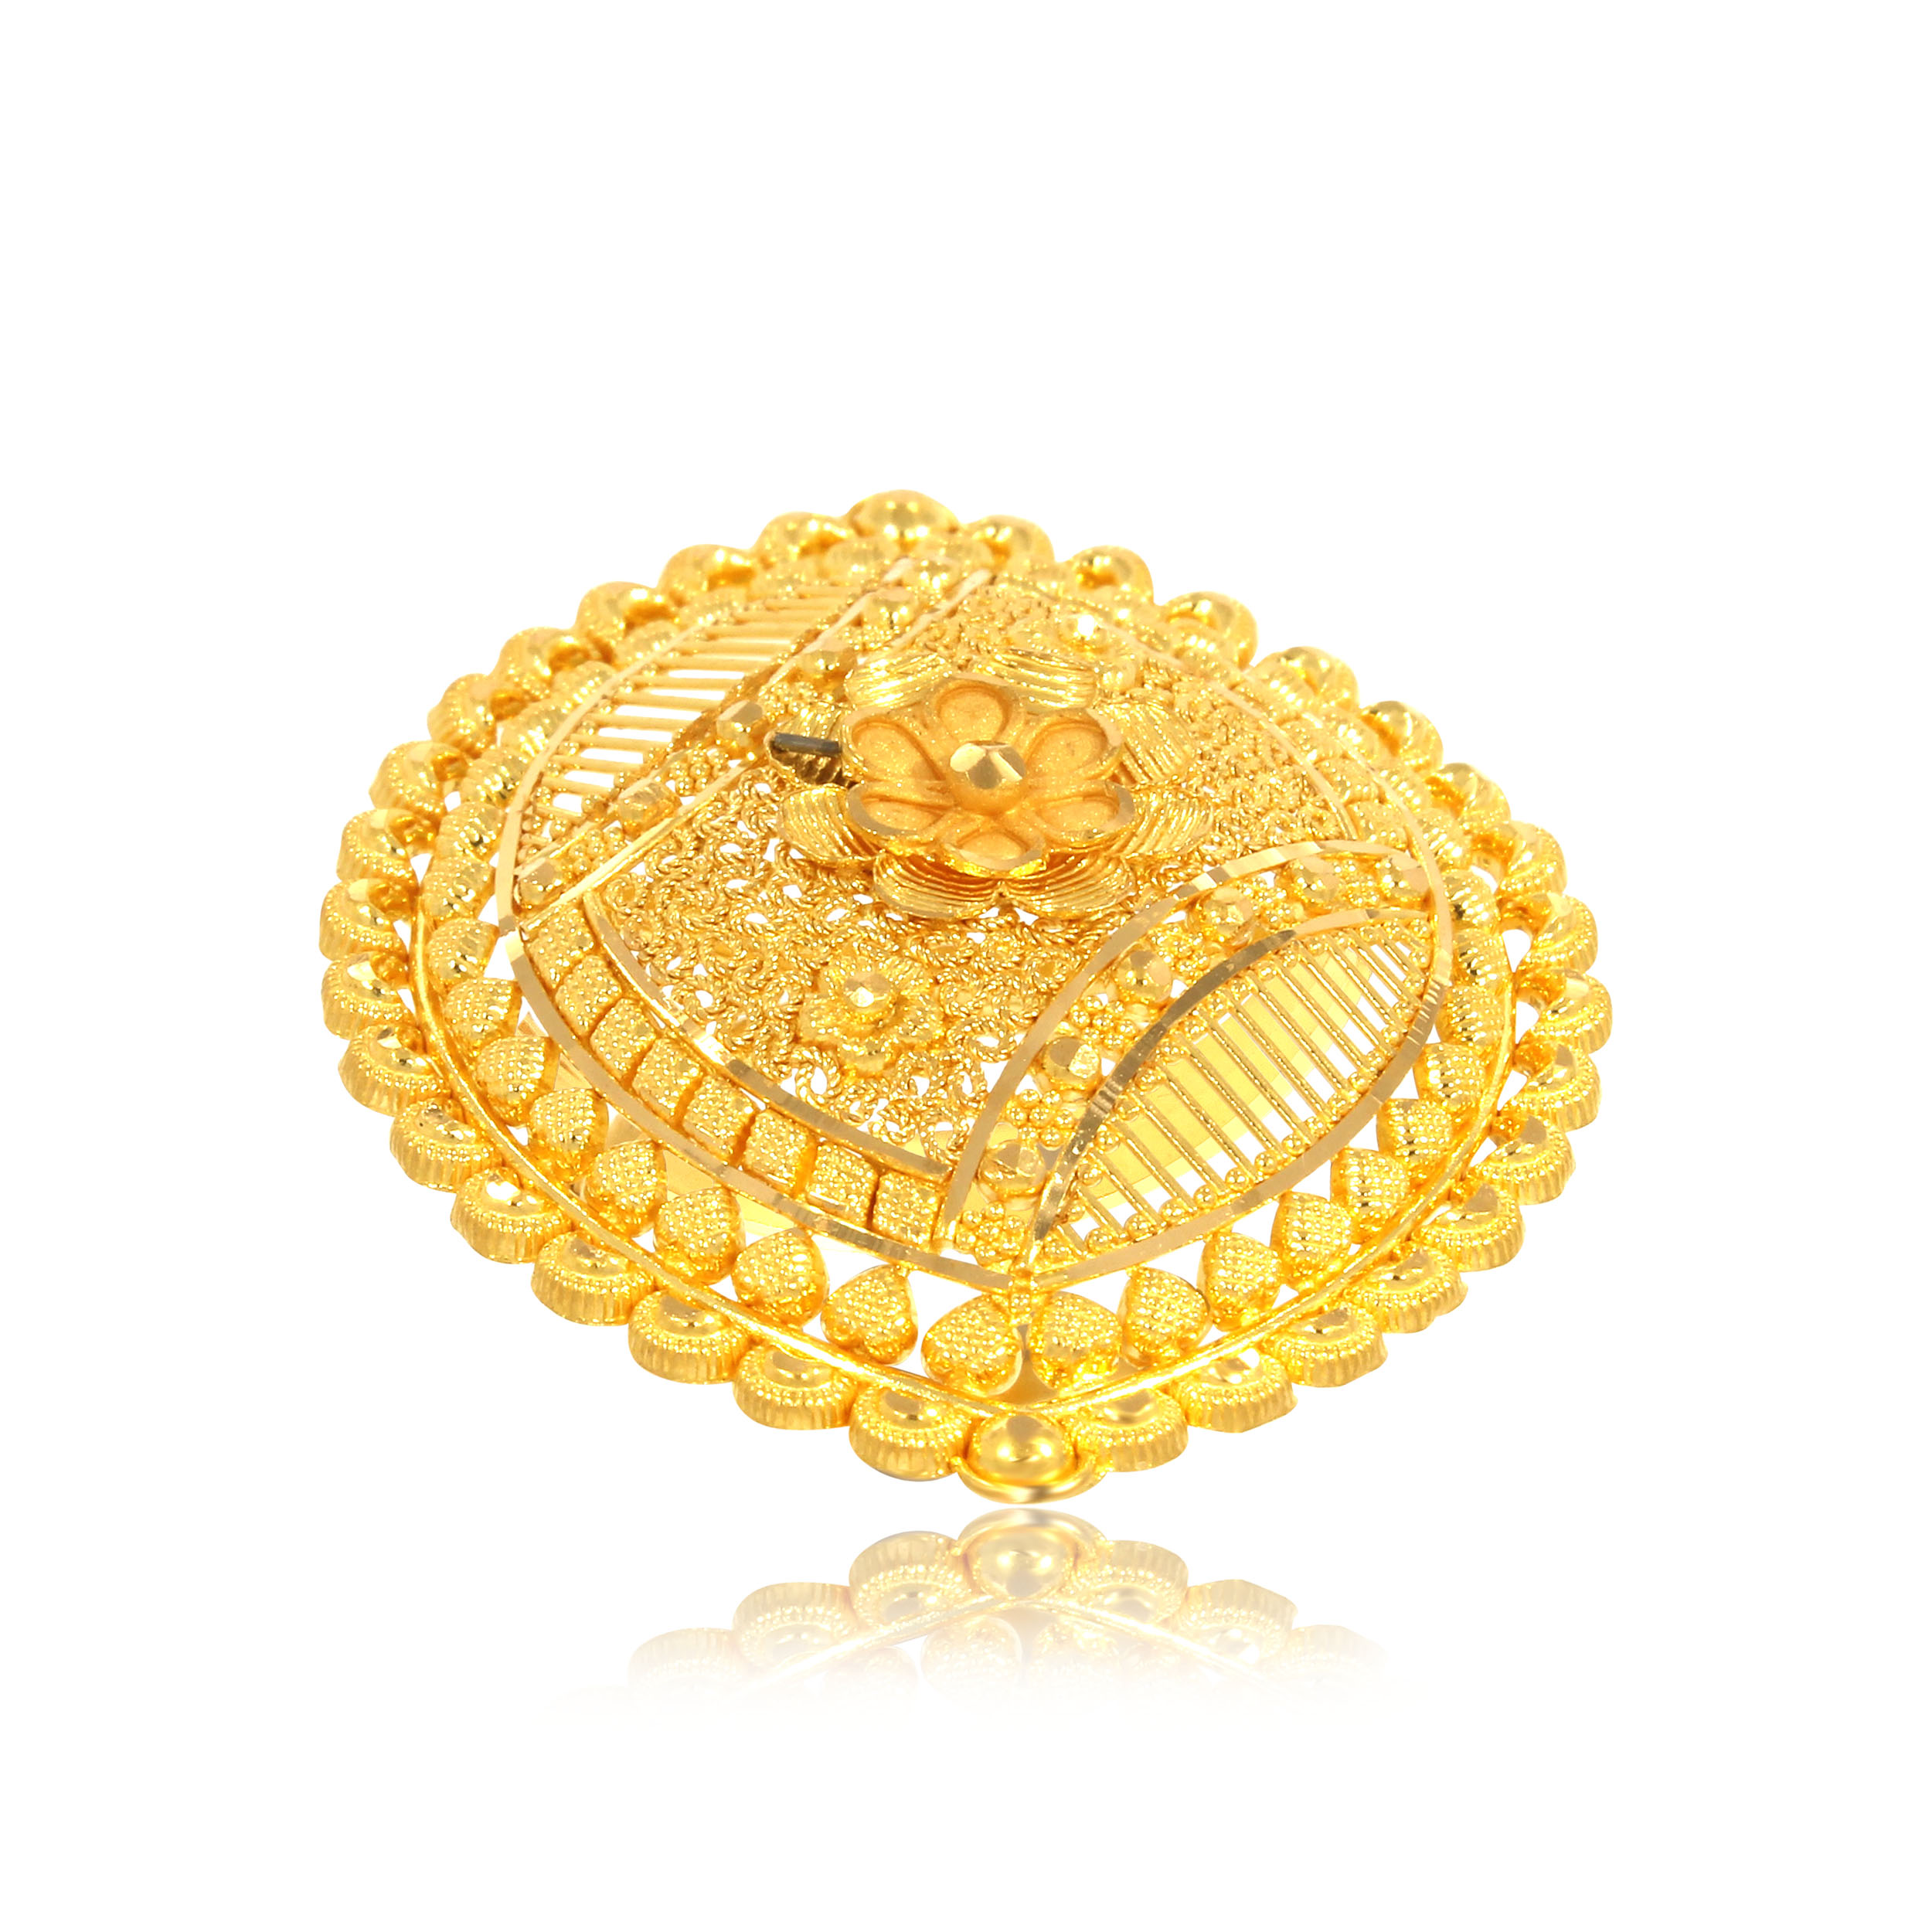 divya aabi jewels  22ct bis hallmark gold ring for the woman